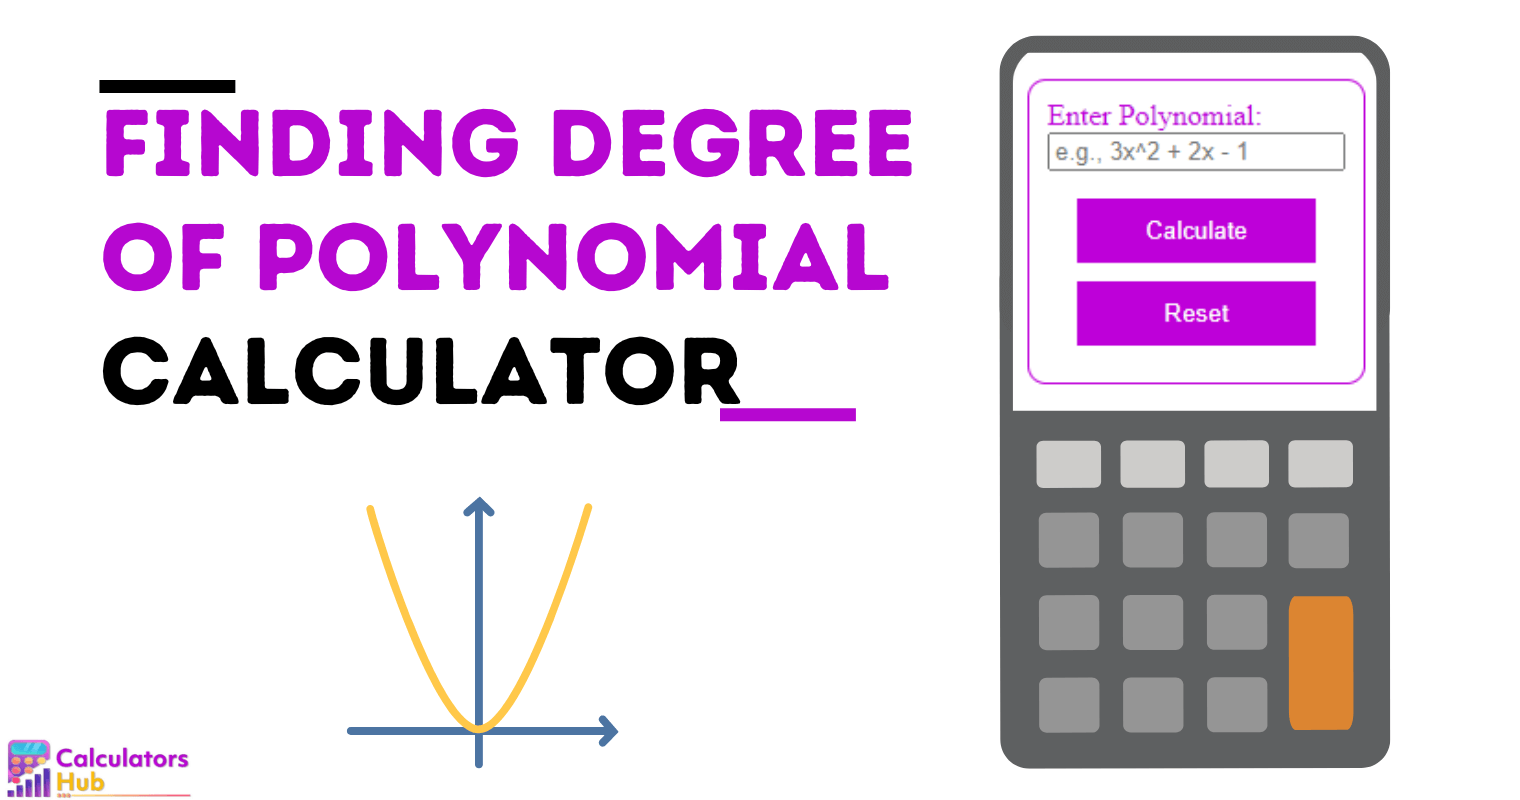 Finding Degree of Polynomial Calculator